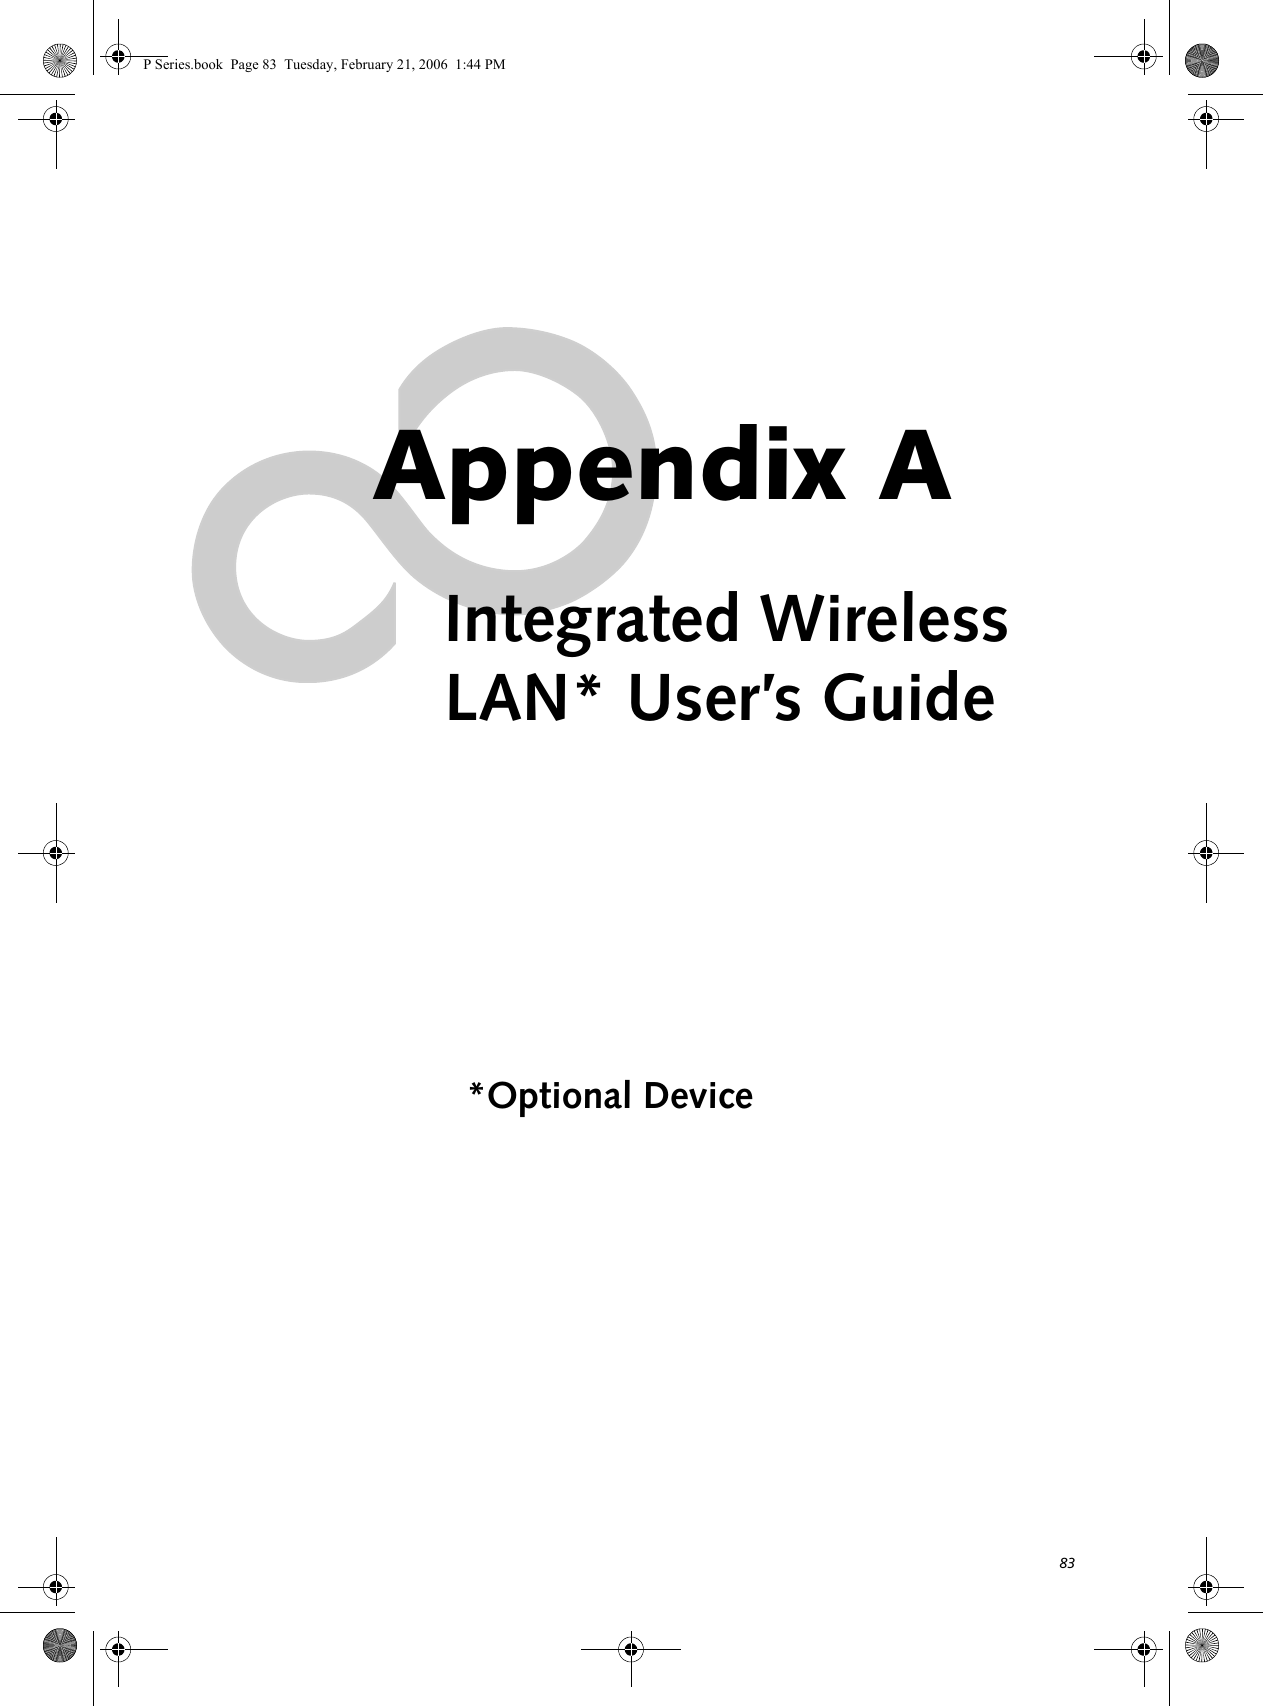 83Appendix AIntegrated WirelessLAN* User’s Guide*Optional DeviceP Series.book  Page 83  Tuesday, February 21, 2006  1:44 PM